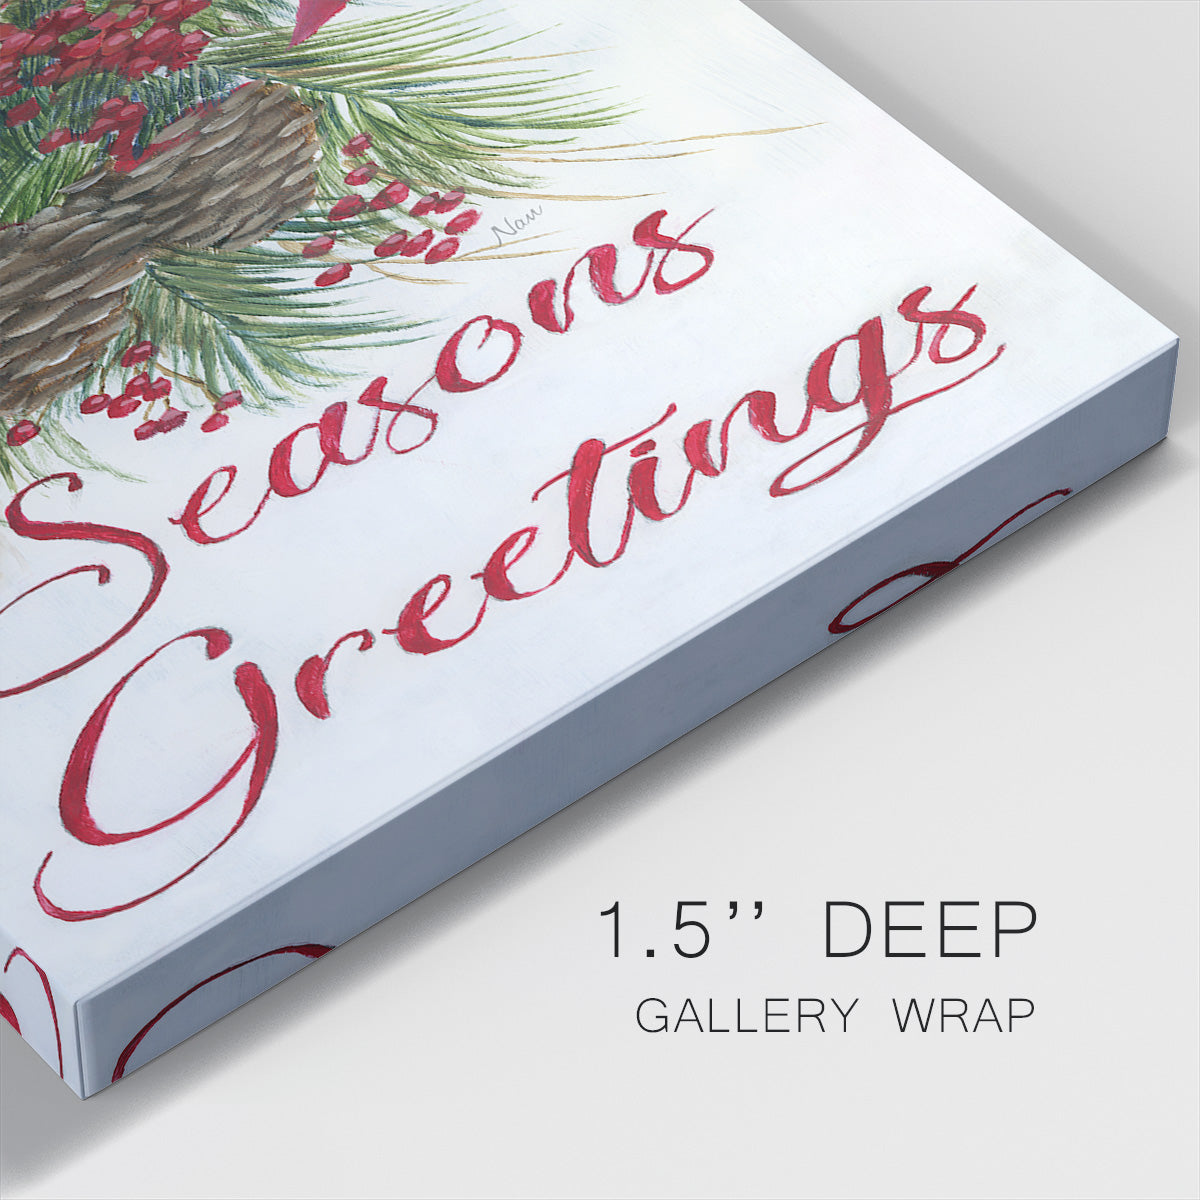 Seasons Greetings - Gallery Wrapped Canvas